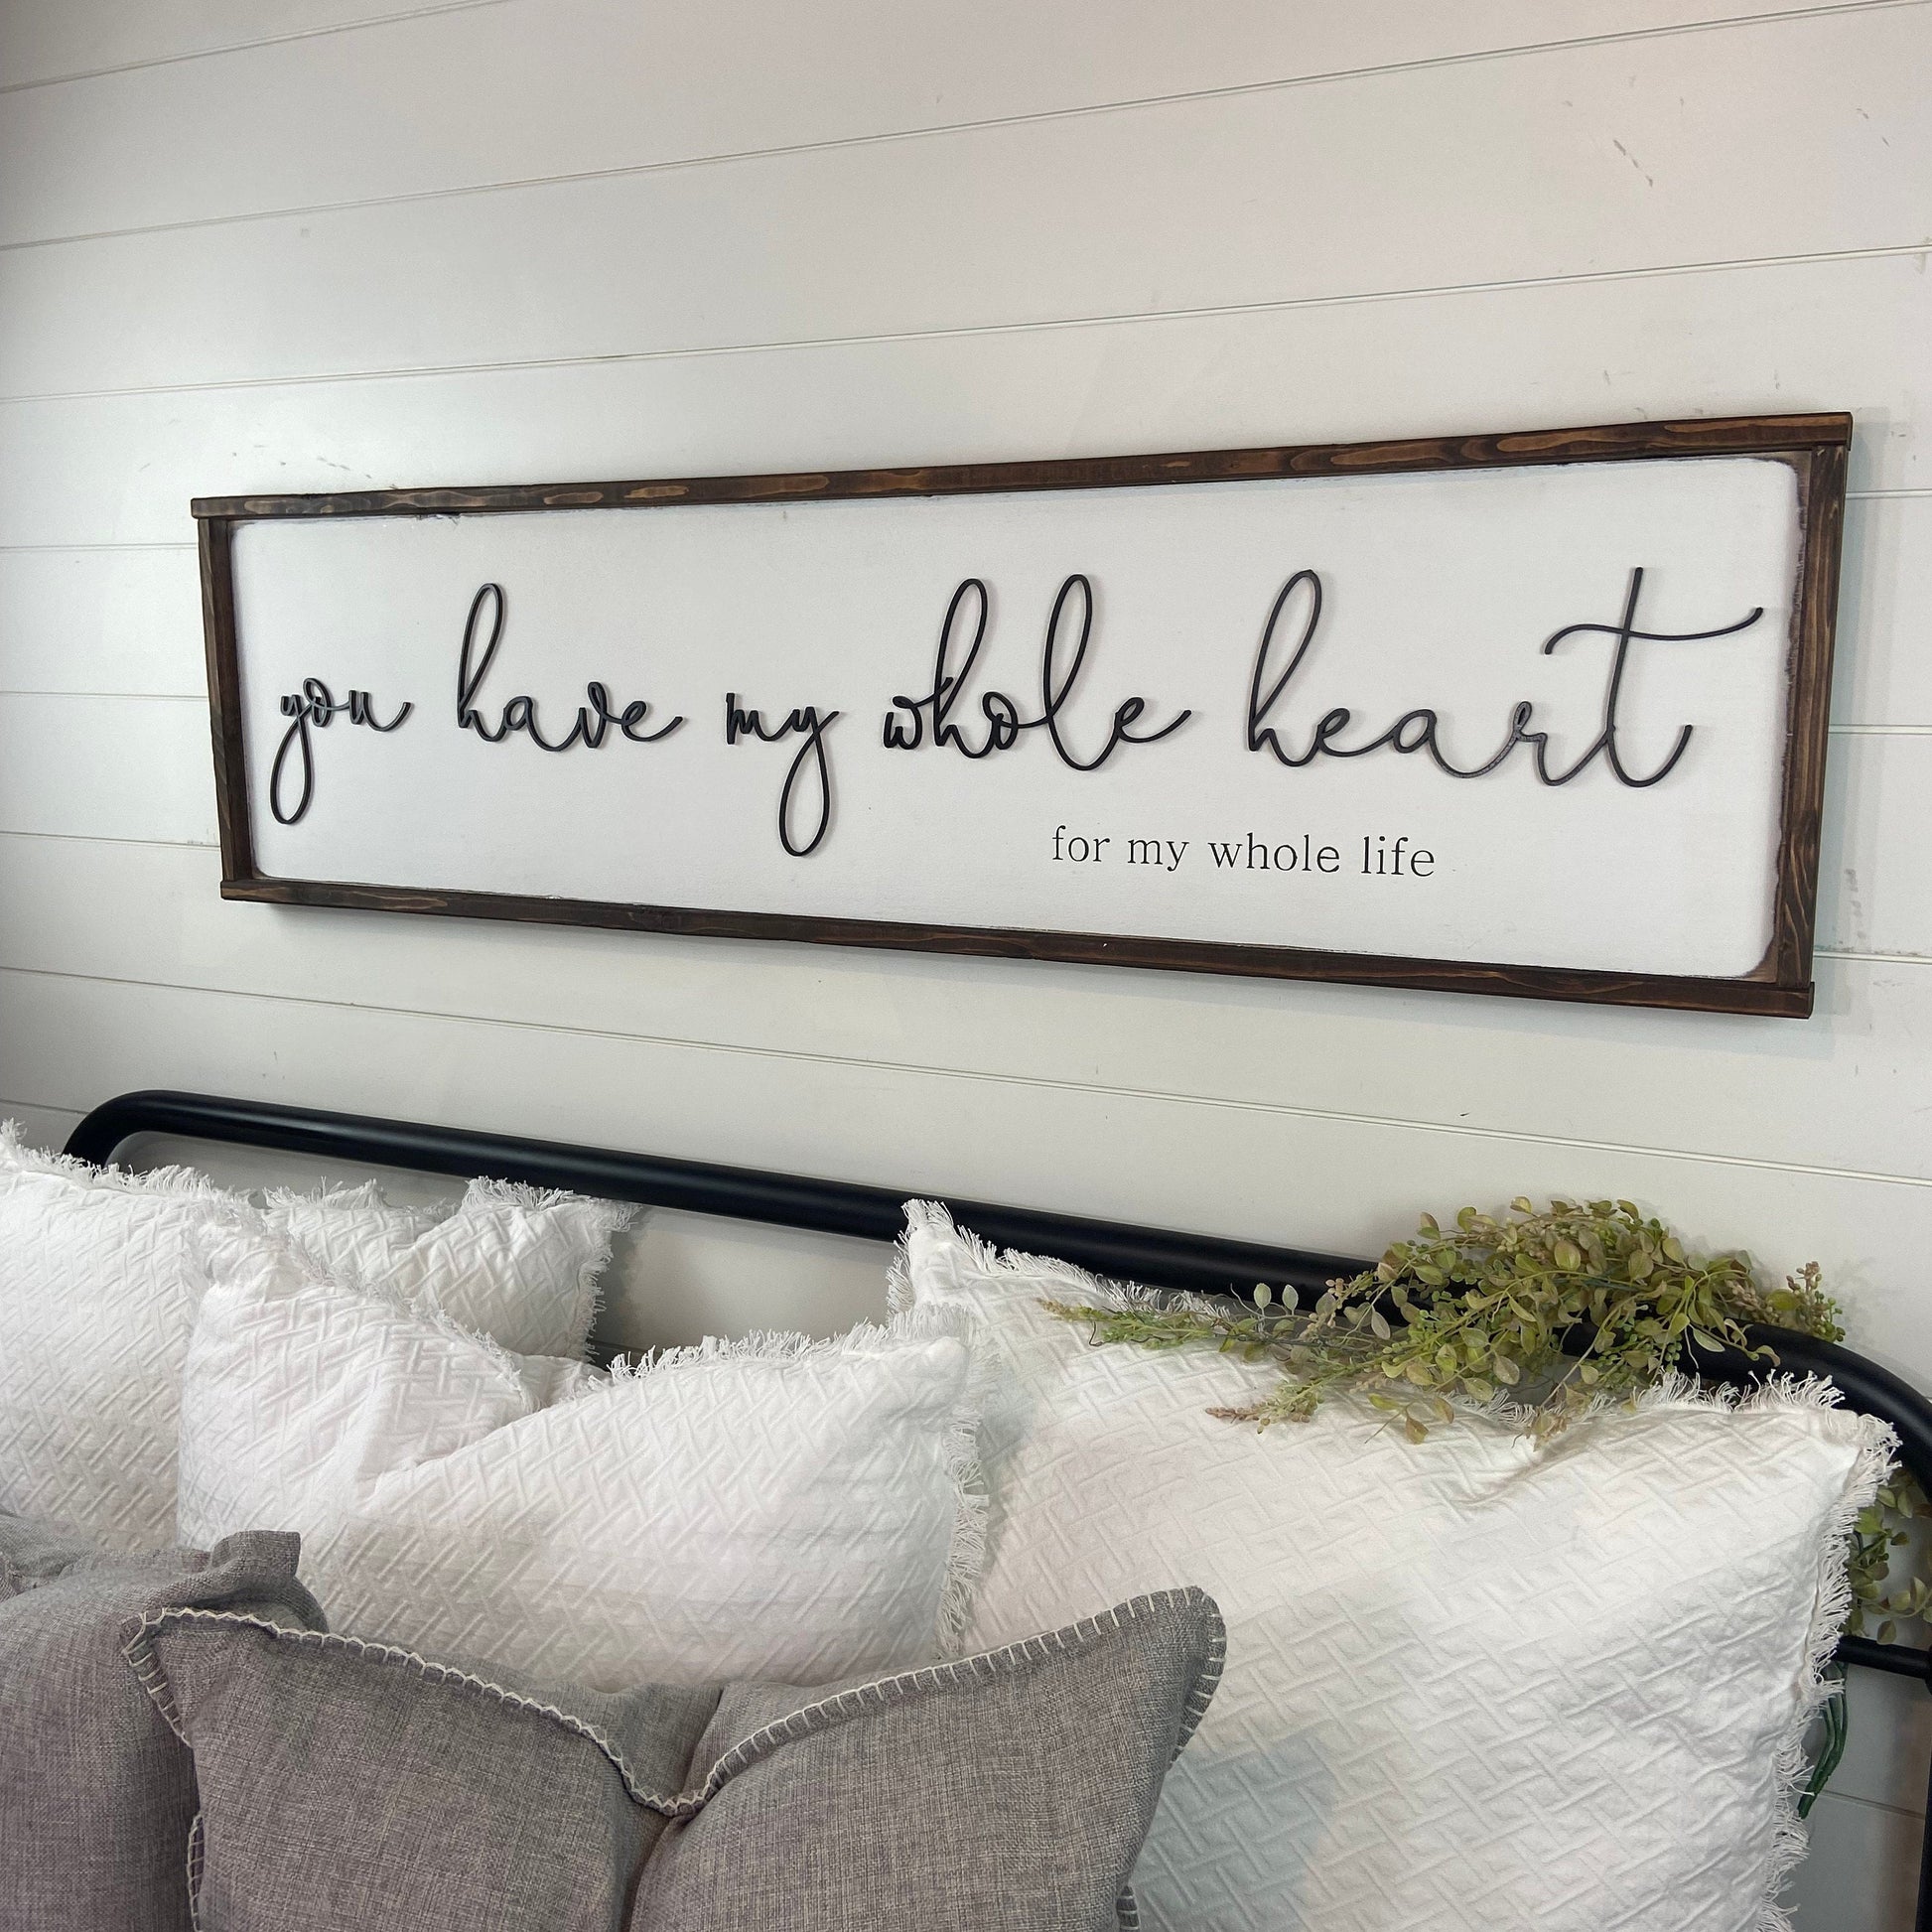 you have my whole heart for my whole life - above over the bed sign - master bedroom wall art [FREE SHIPPING!]